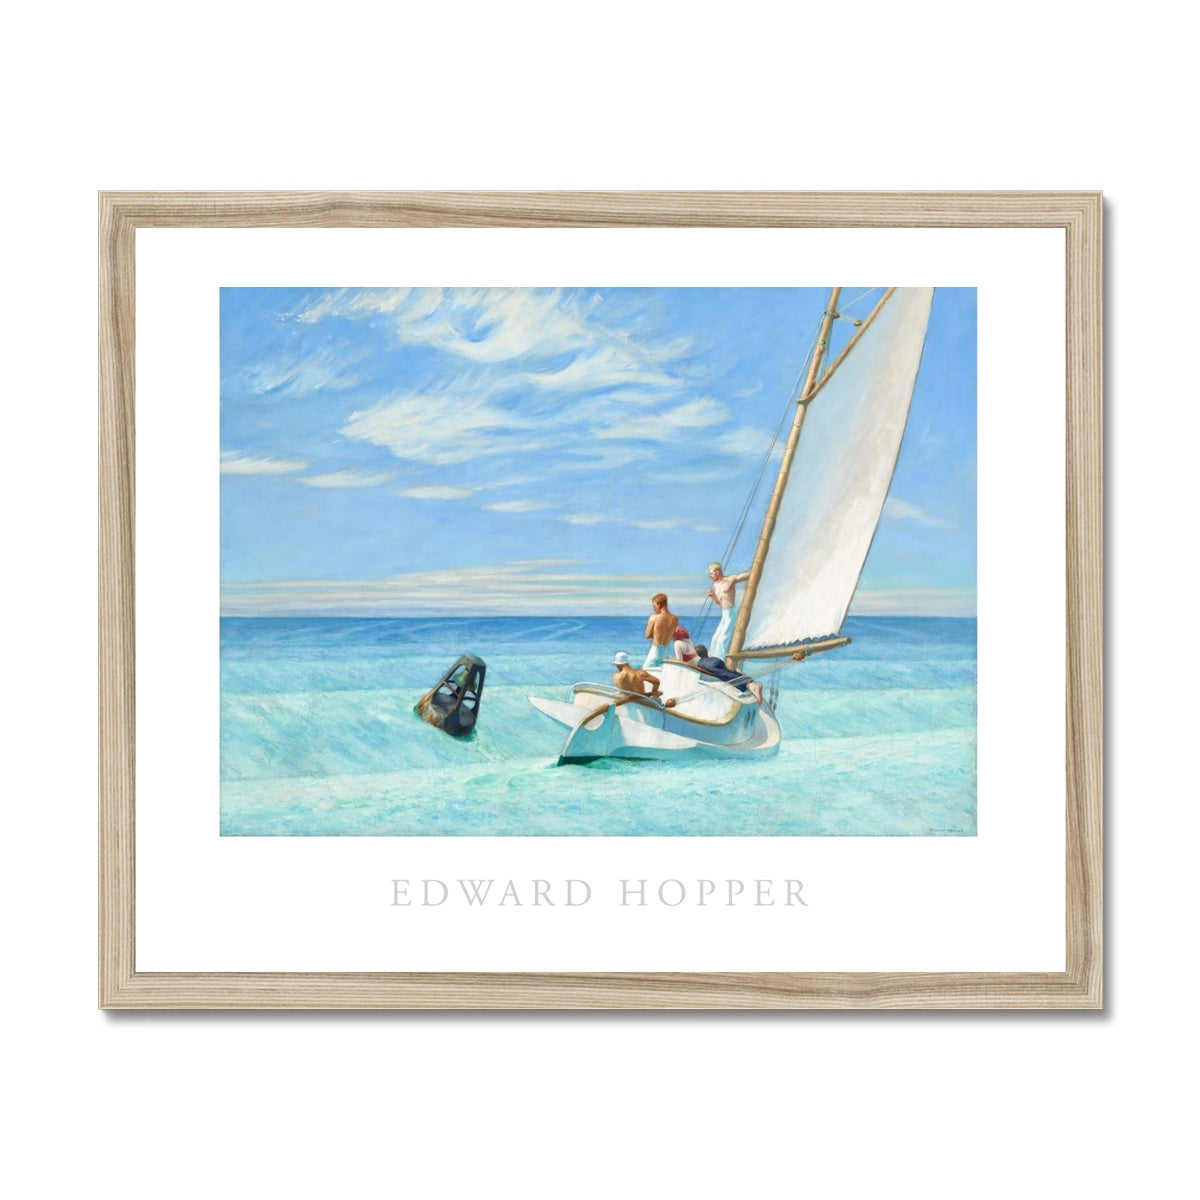 Hopper - Ground swell gerahmtes Poster - Atopurinto